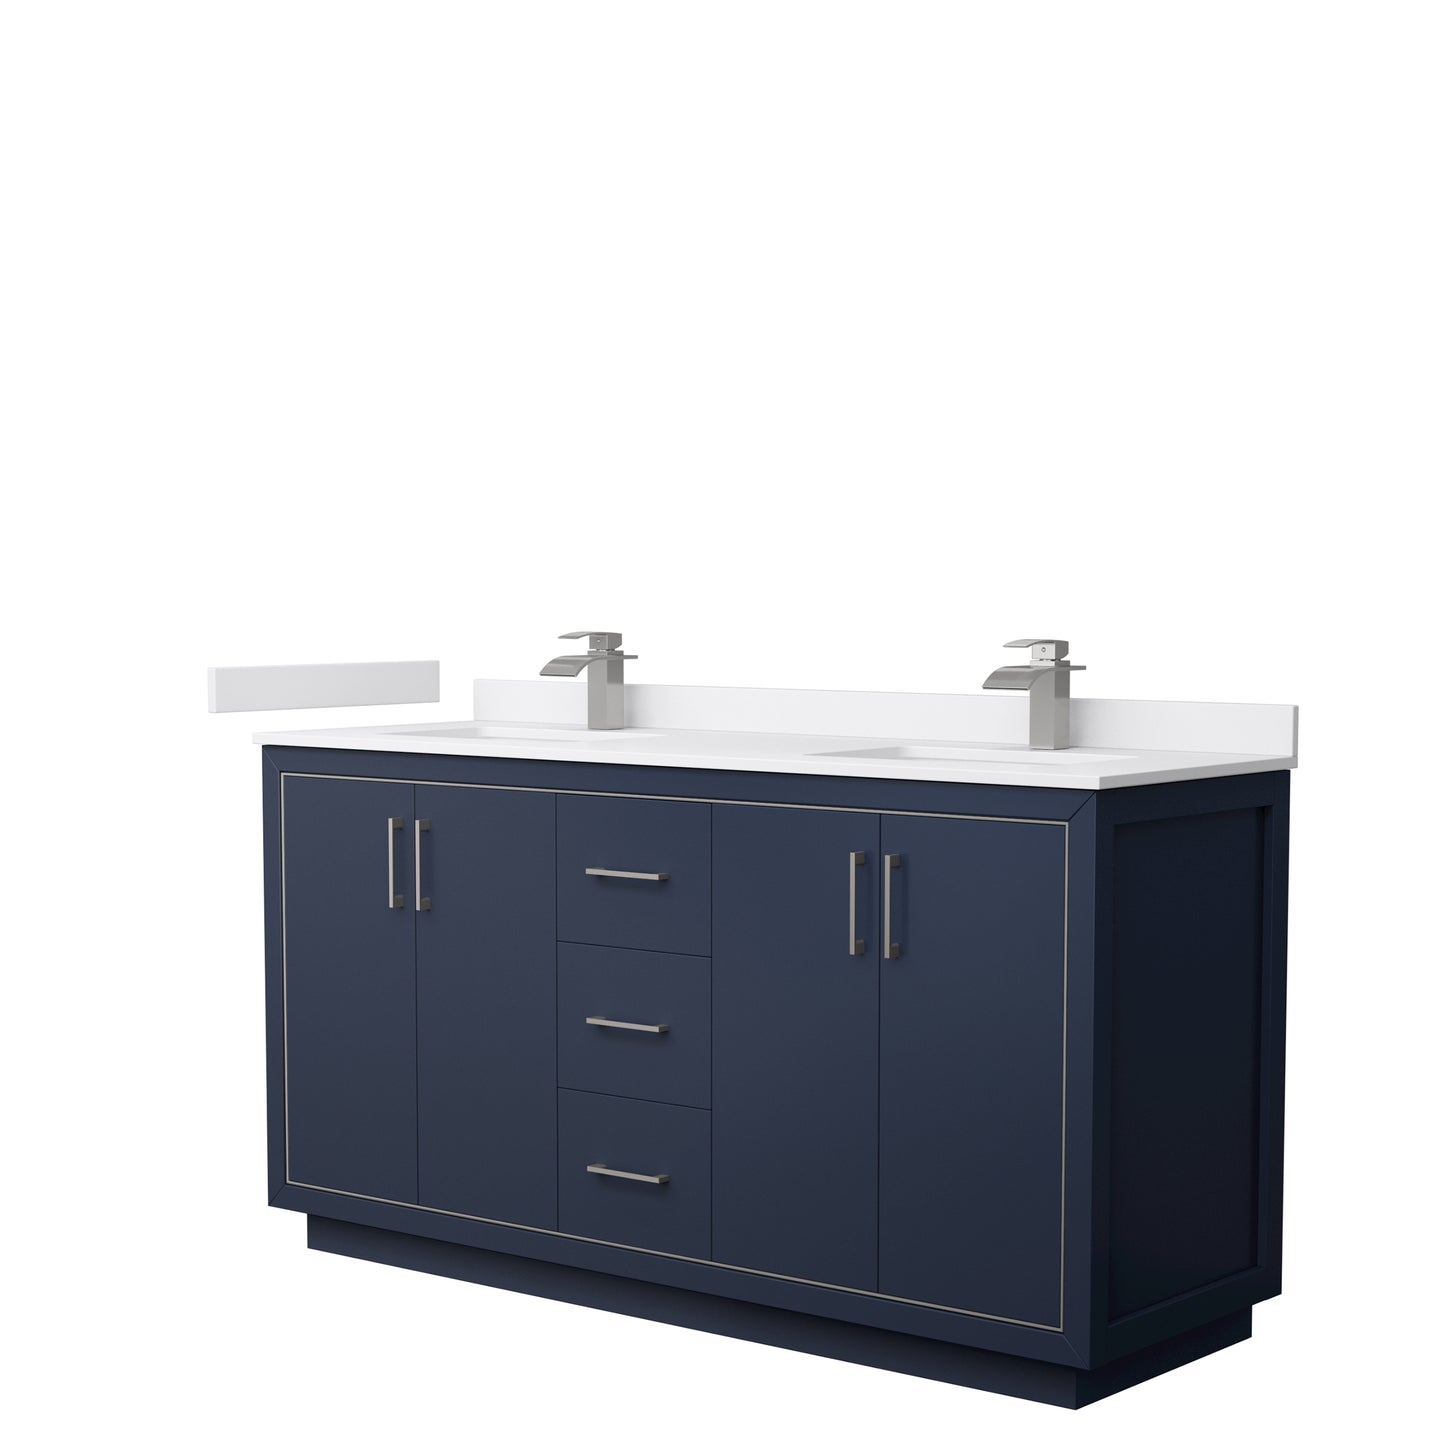 Wyndham Icon 66 Inch Double Bathroom Vanity White Cultured Marble Countertop with Undermount Square Sinks and Brushed Nickel Trim - Luxe Bathroom Vanities